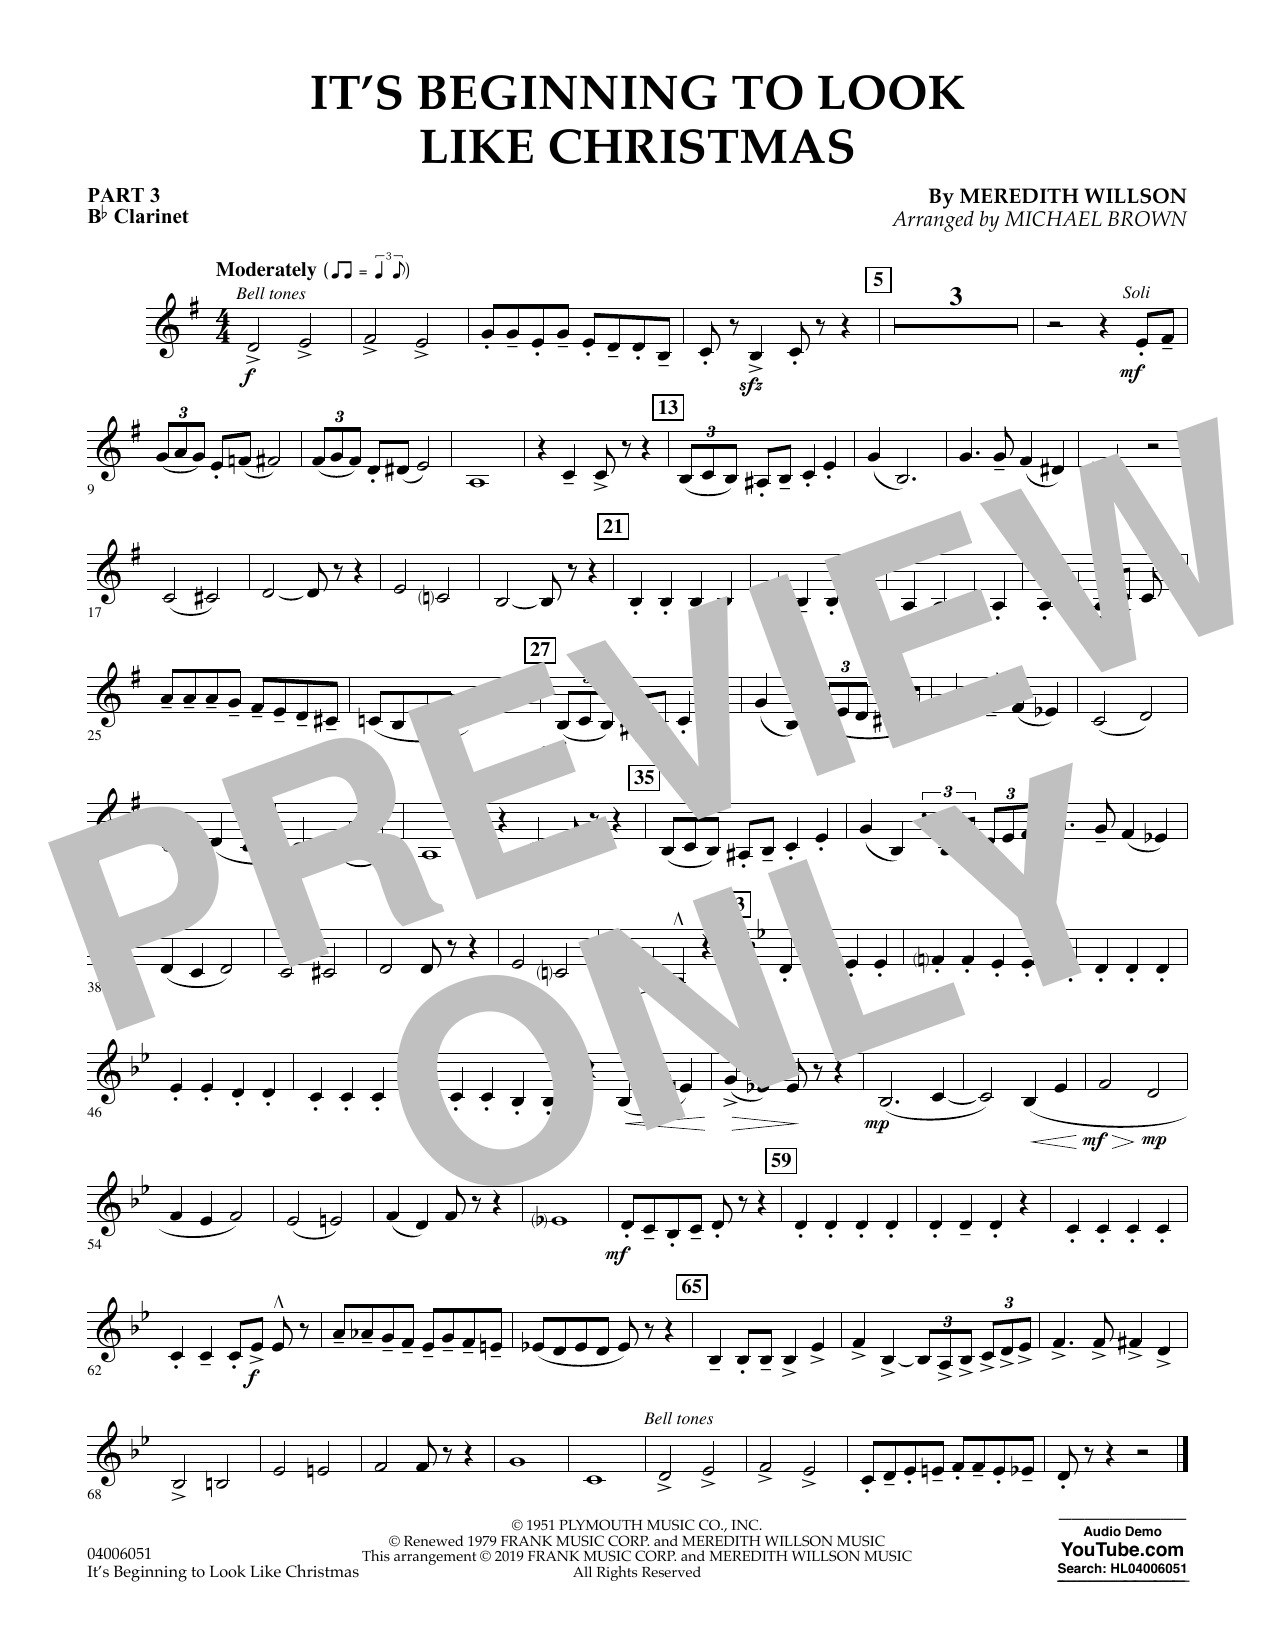 Meredith Willson It's Beginning to Look Like Christmas (arr. Michael Brown) - Pt.3 - Bb Clarinet sheet music preview music notes and score for Concert Band including 1 page(s)